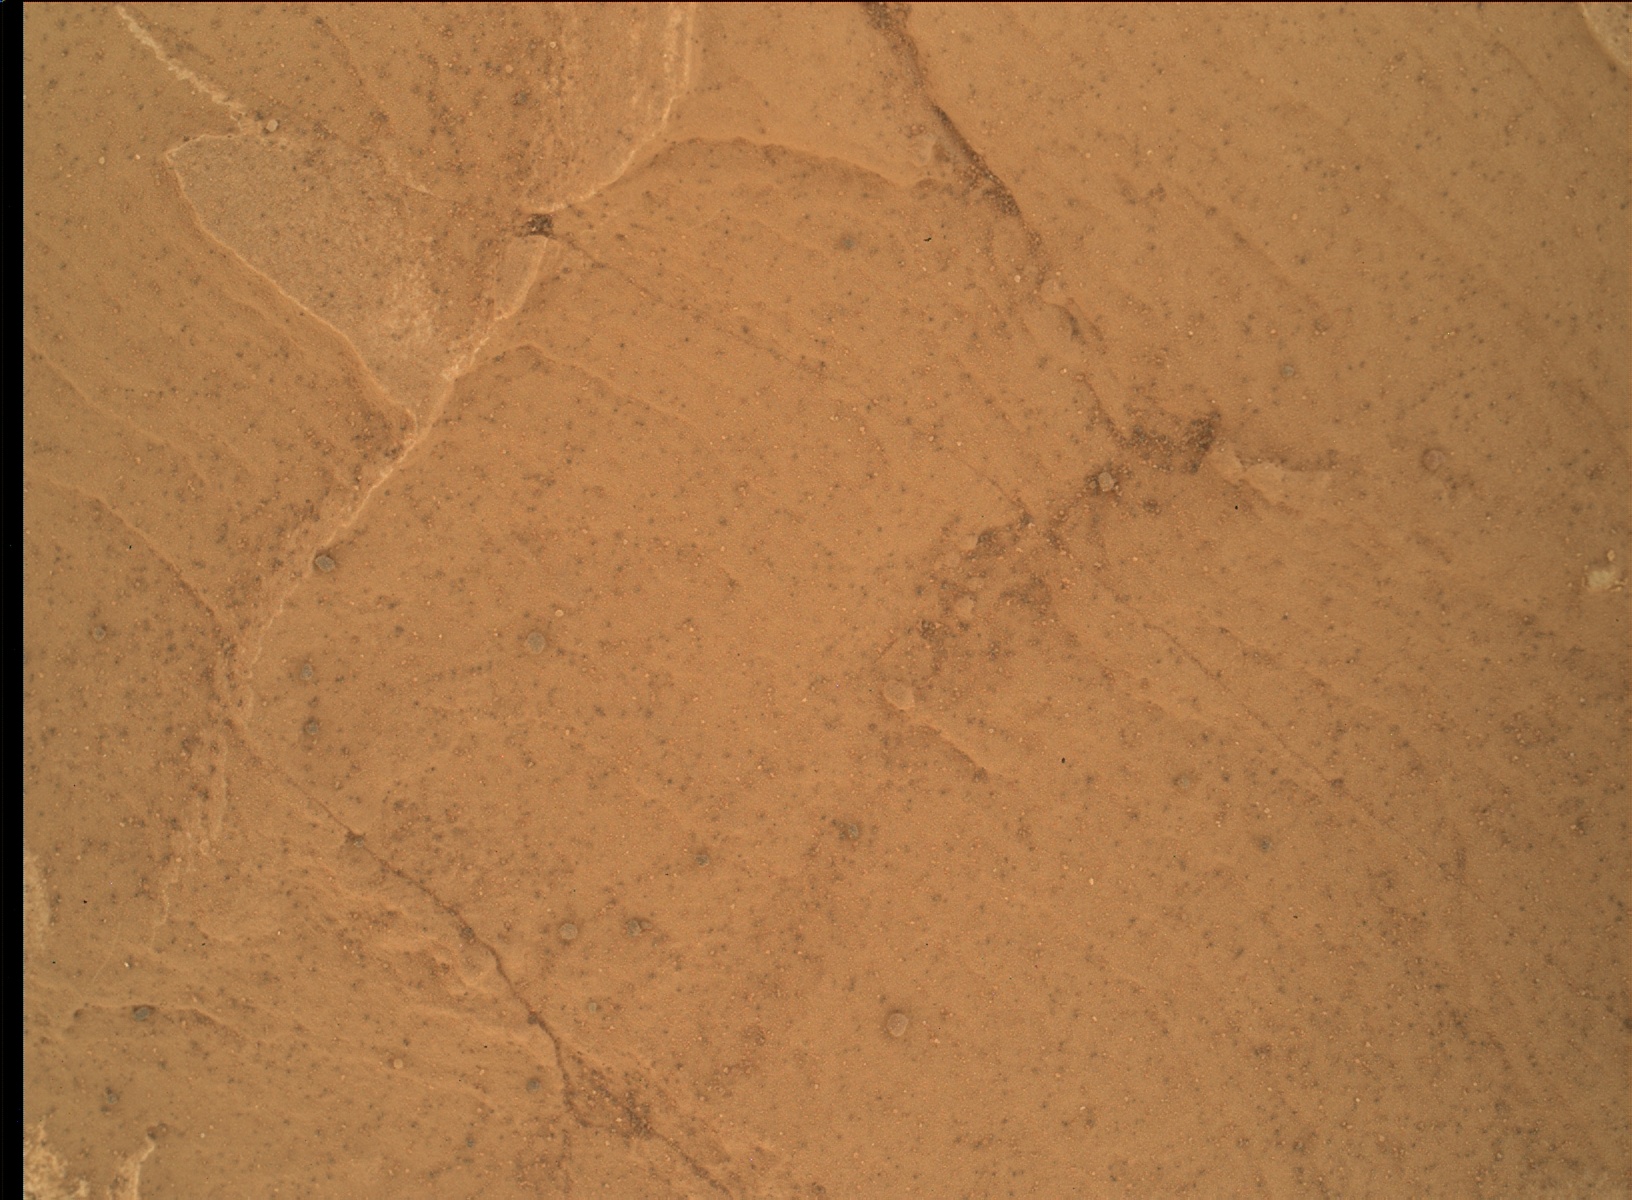 Nasa's Mars rover Curiosity acquired this image using its Mars Hand Lens Imager (MAHLI) on Sol 1721